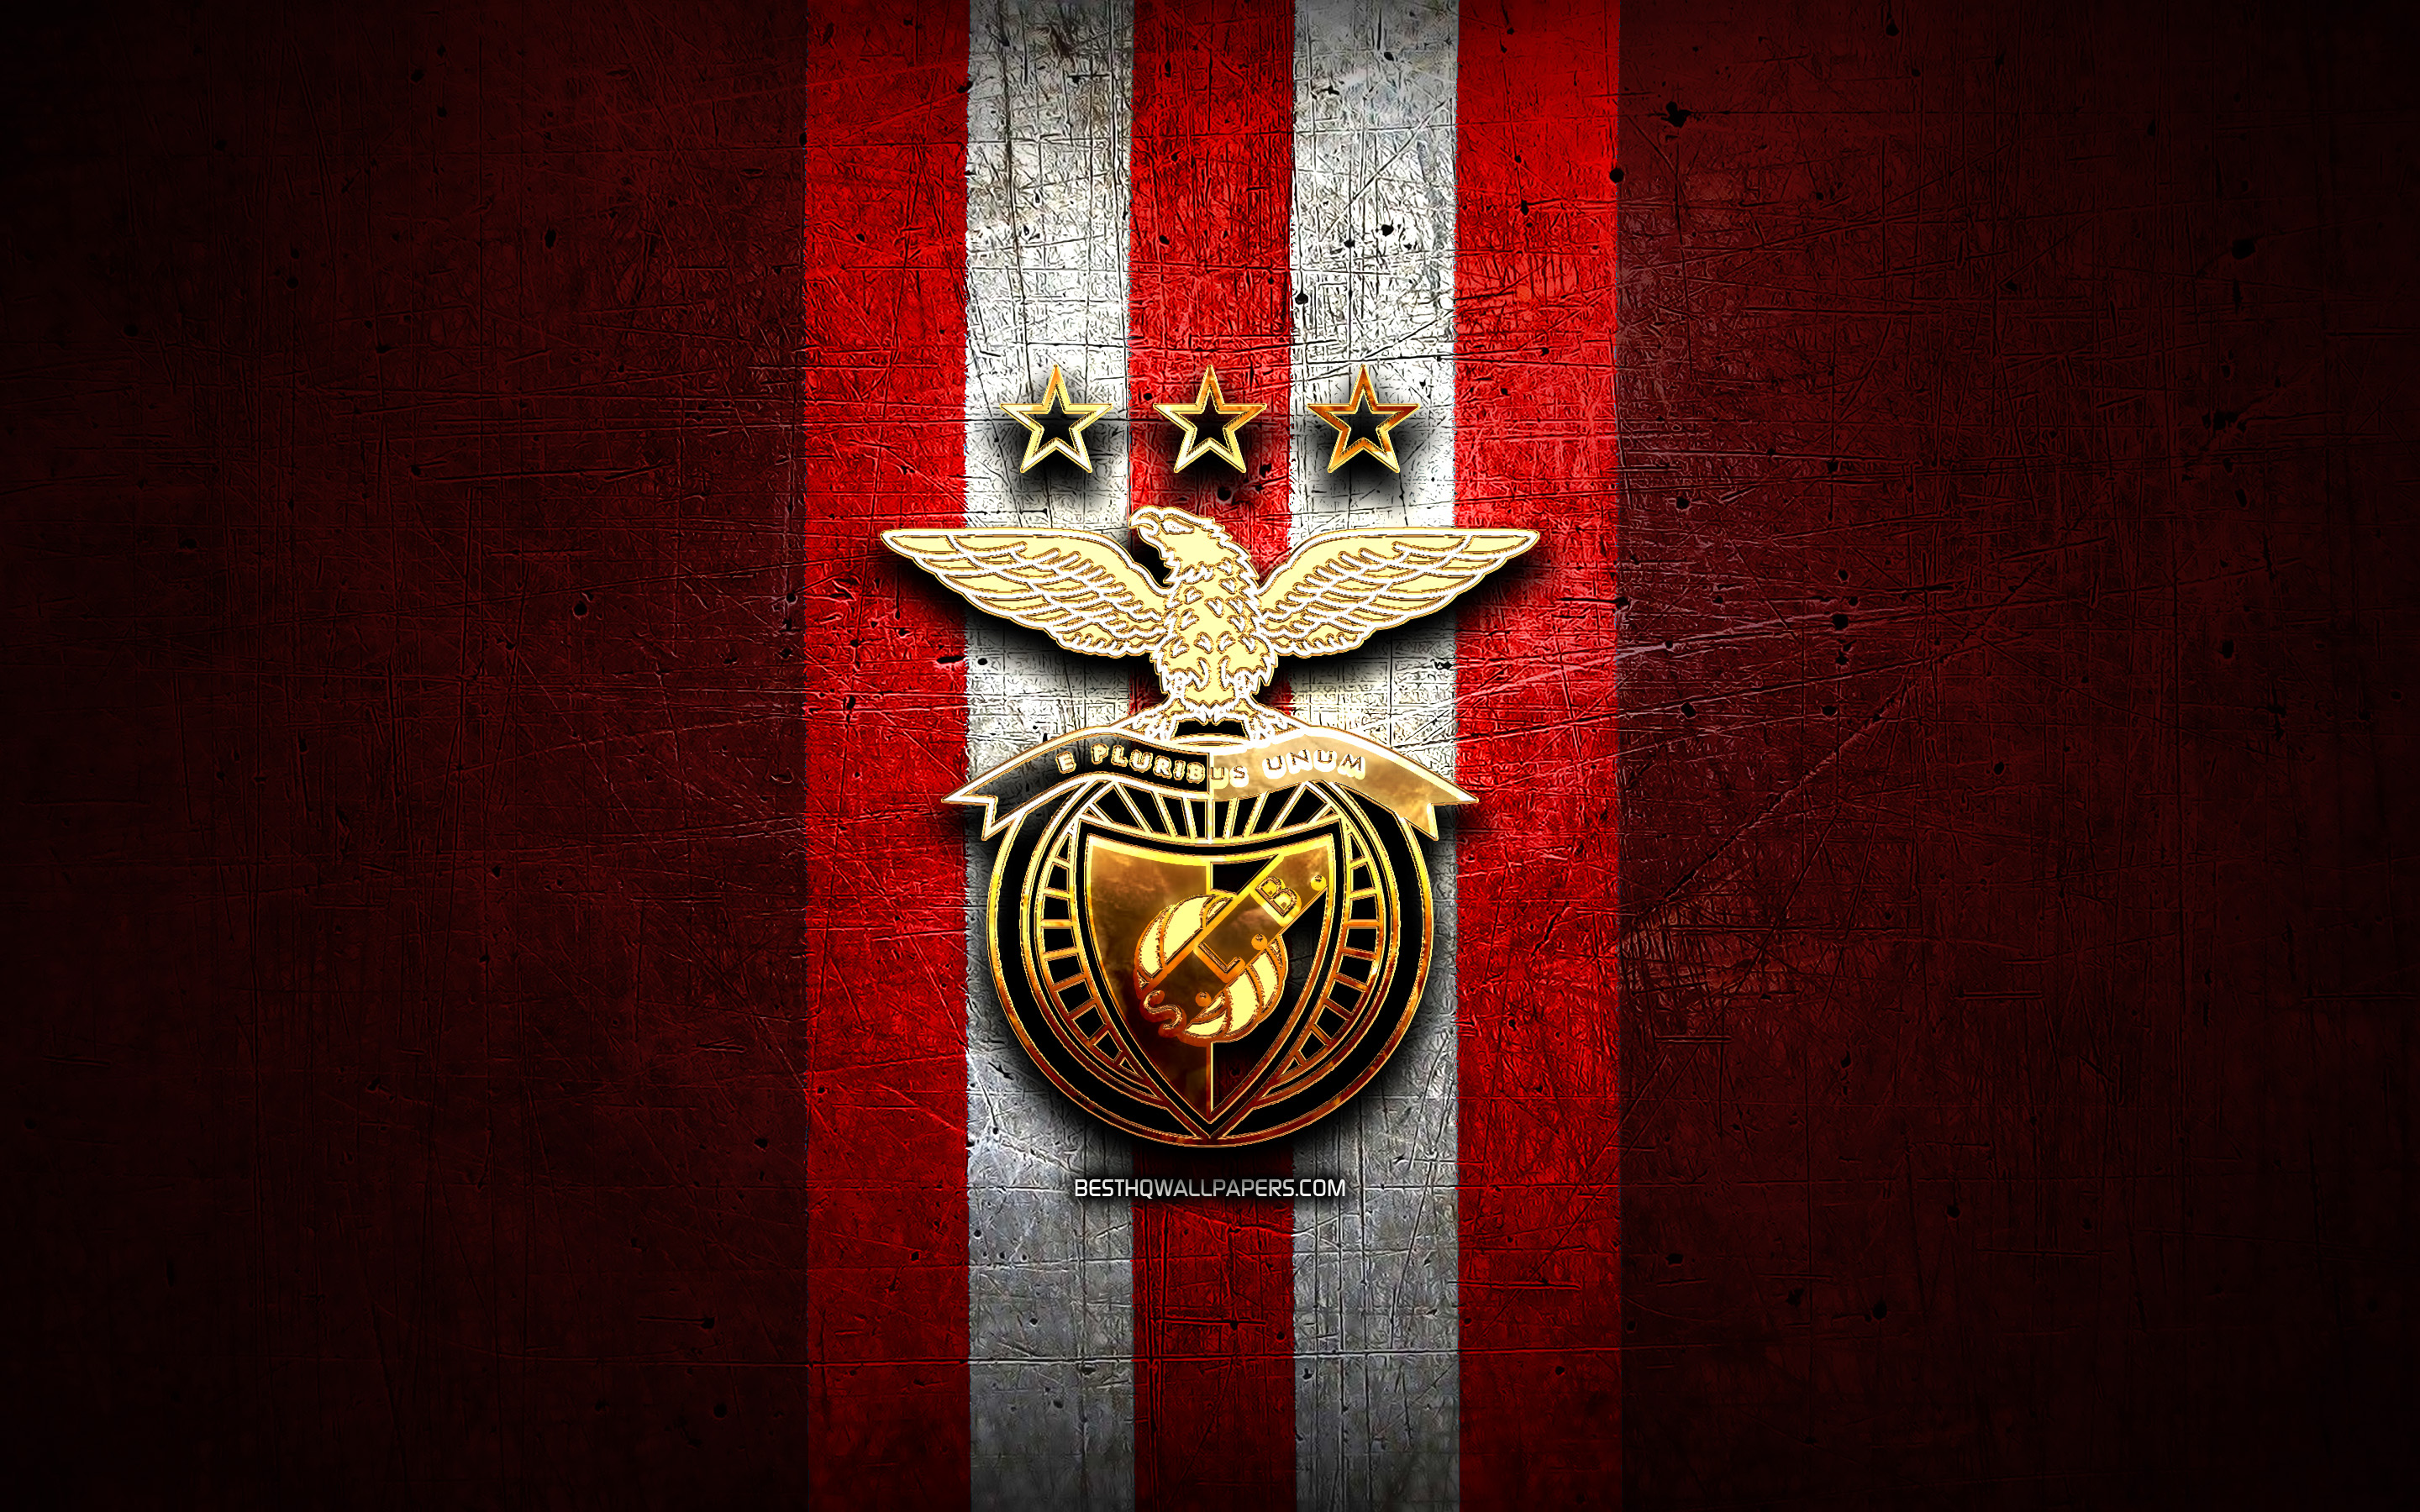 Download wallpapers benfica fc golden logo primeira liga red metal background football sl benfica portuguese football club benfica logo soccer portugal for desktop with resolution x high quality hd pictures wallpapers